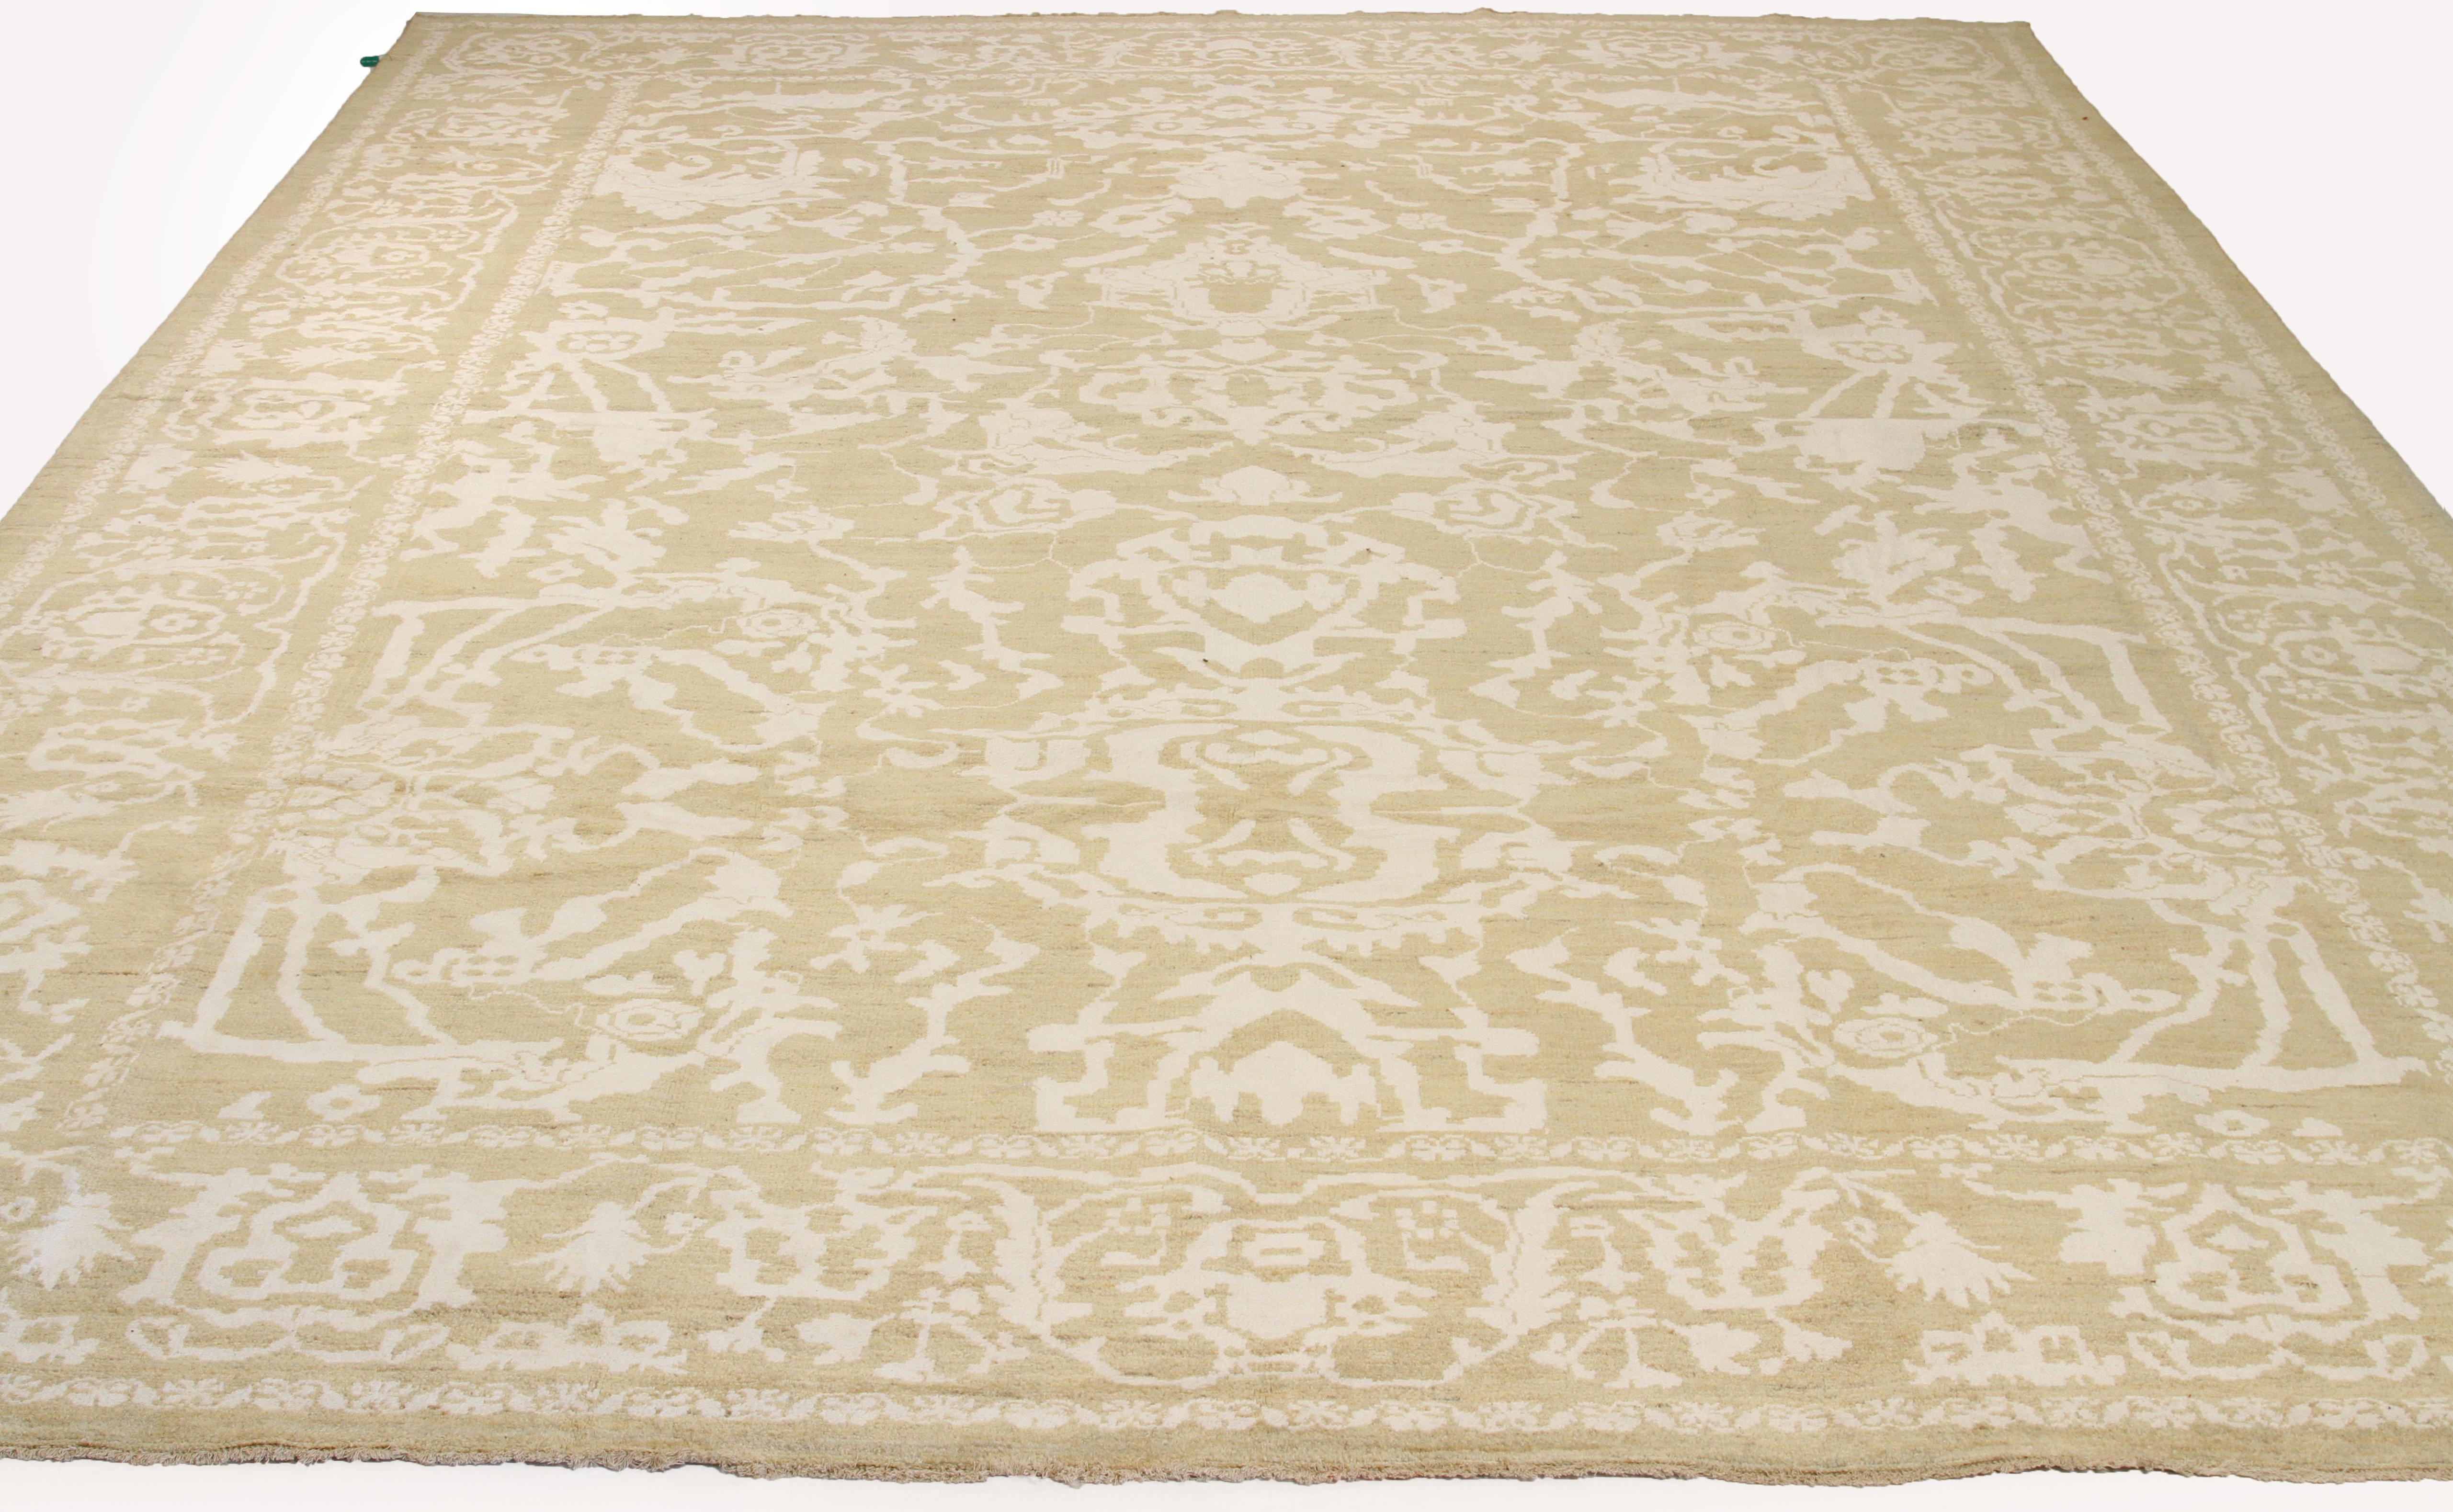 Modern hand knotted Turkish rug made from fine wool and all-natural vegetable dyes that are safe for people and pets. This lovely piece features floral design patterns woven in traditional Sultanabad style that originated in ancient Iran. The color